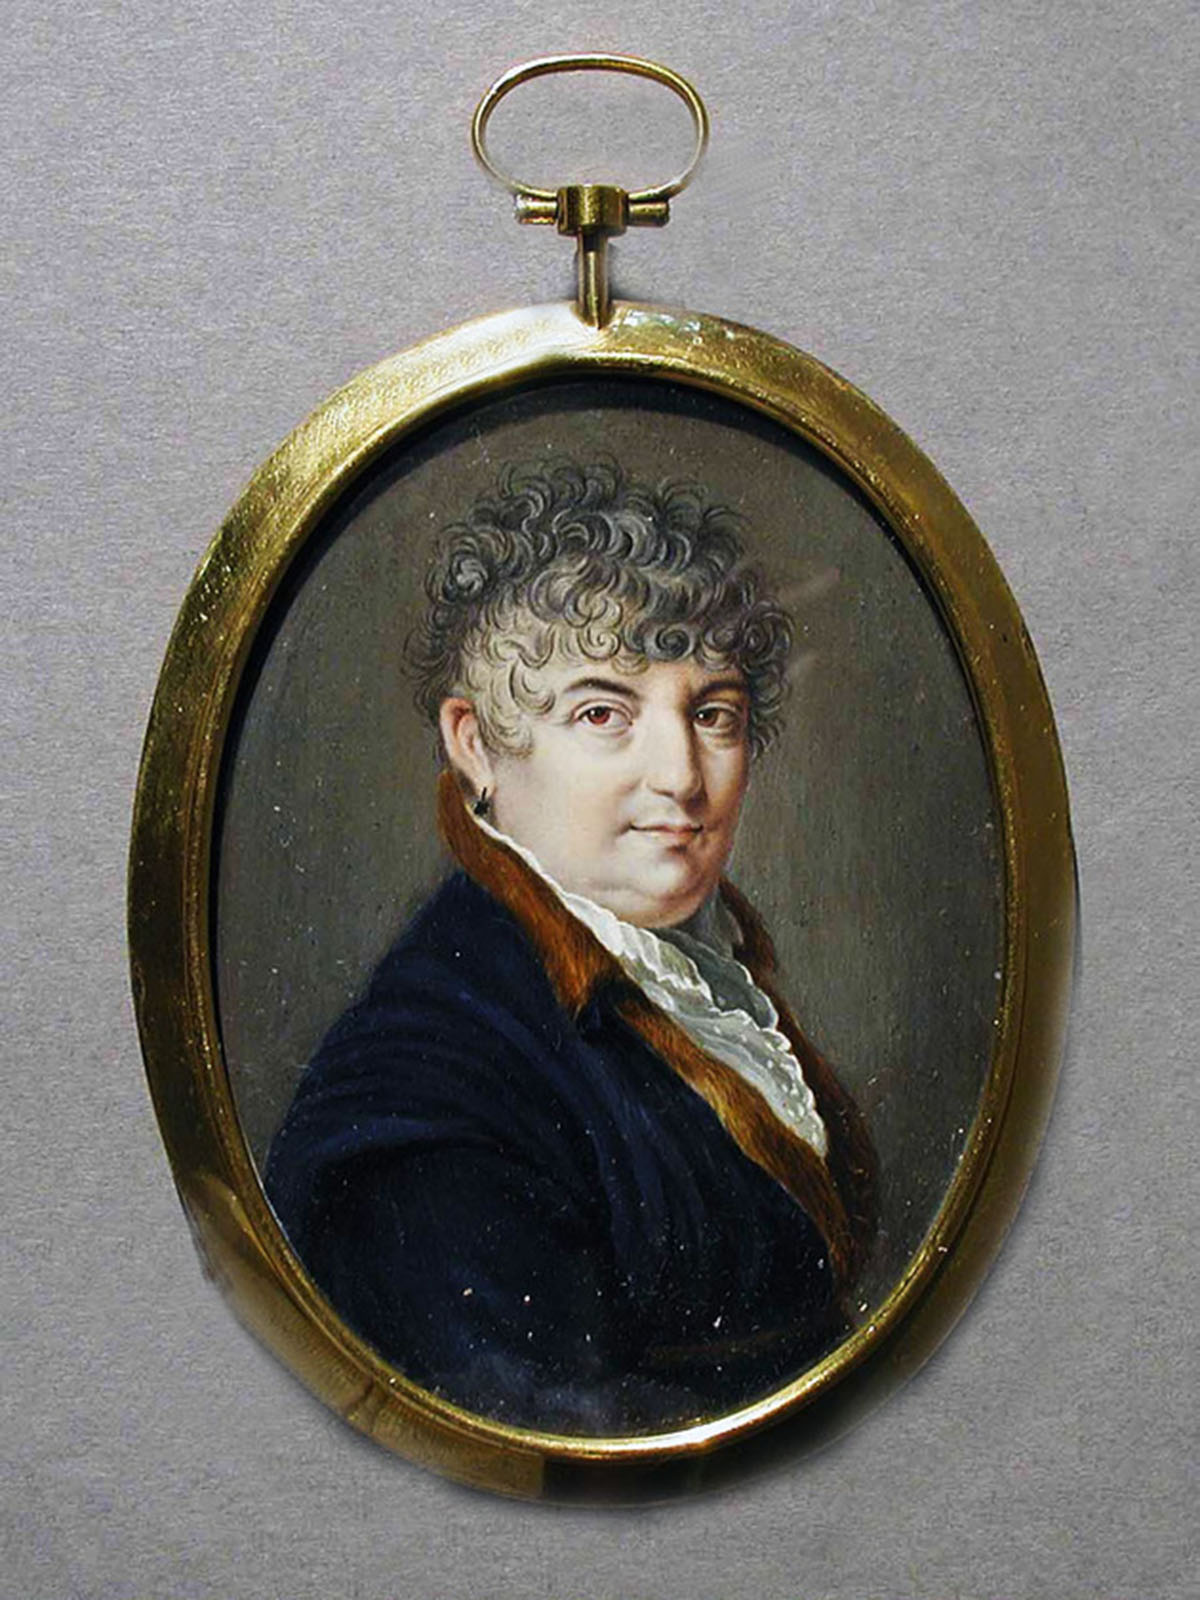 A miniature watercolor portrait of a middle-aged woman is painted on an oval-shaped piece of ivory with a gold frame.